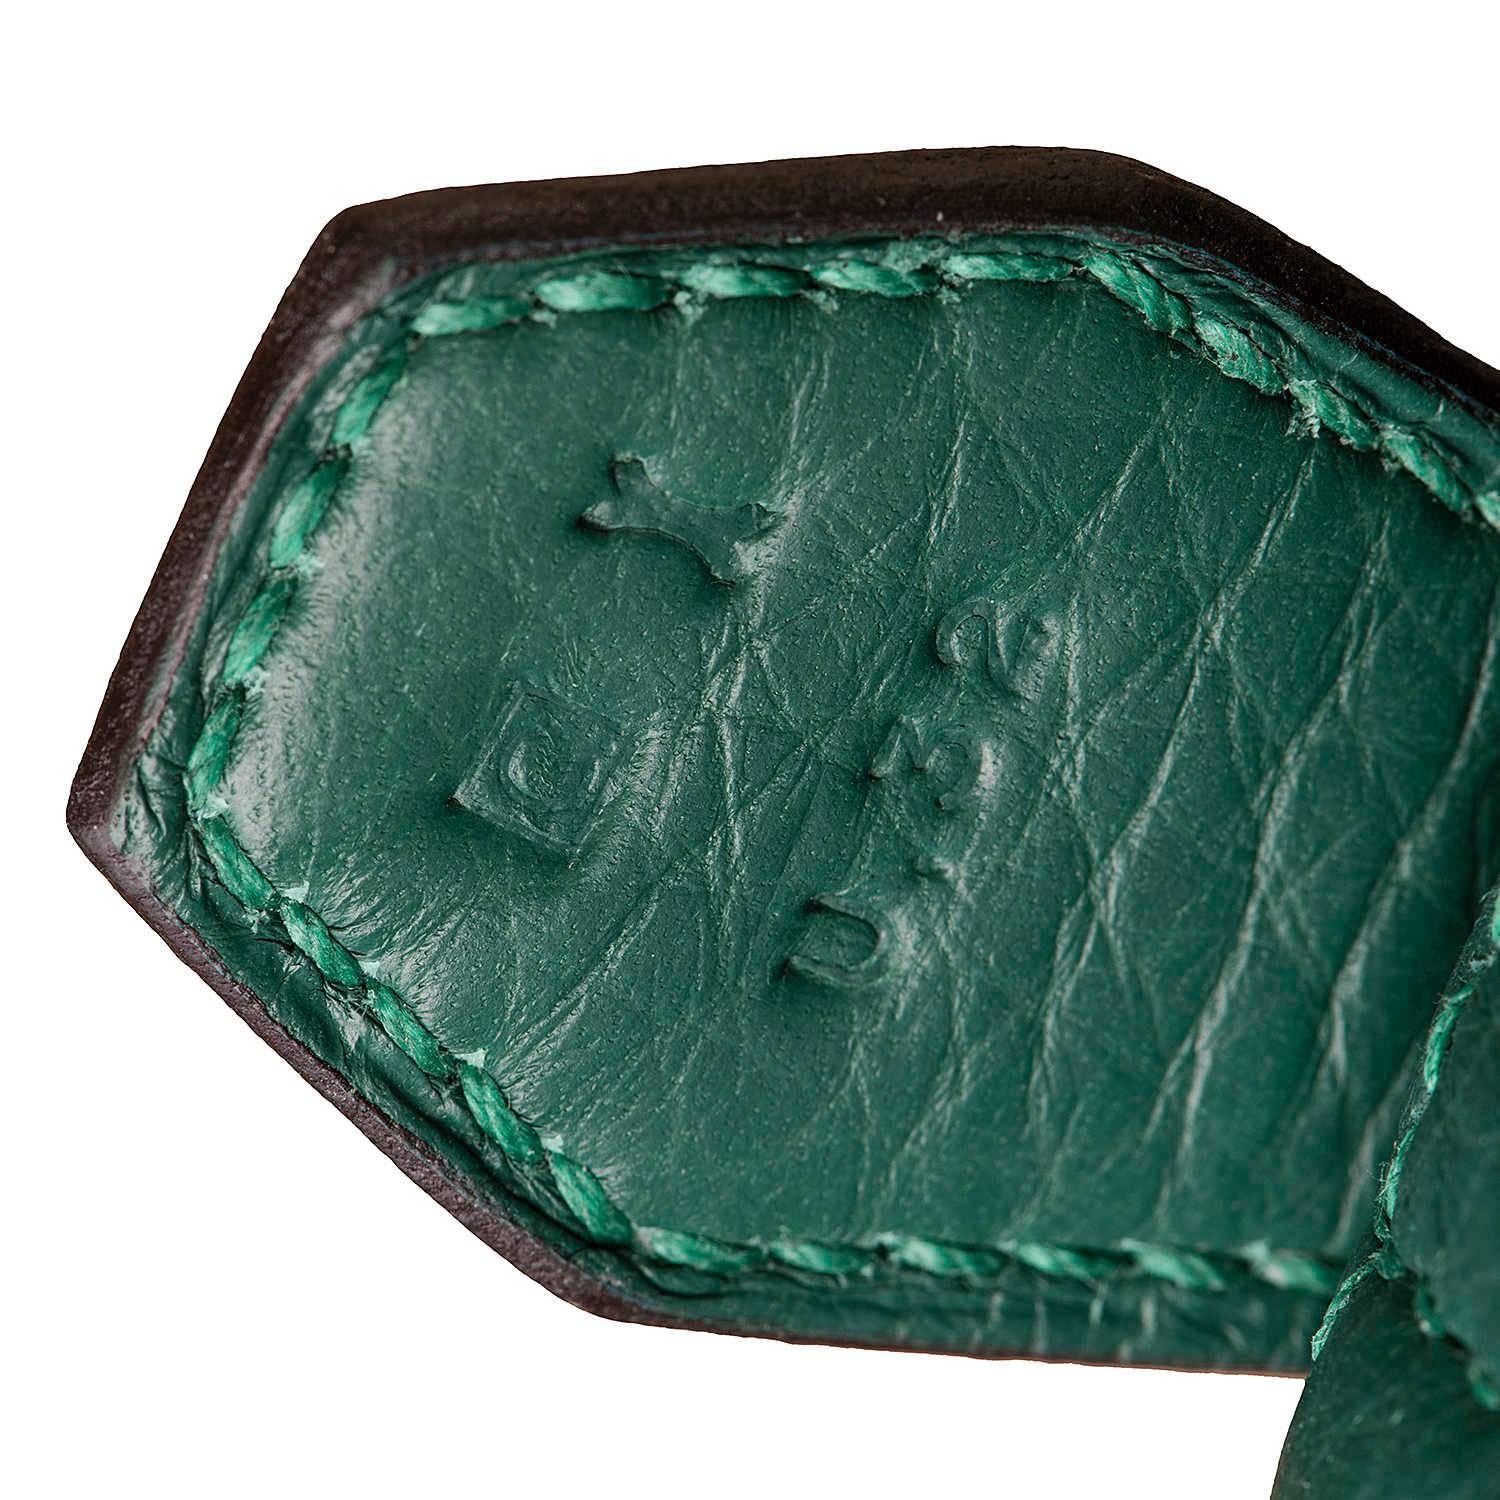 Women's WOW! As New Hermes 31cm Rare 'Malachite Green' Togo Leather Bolide Bag with SHW For Sale